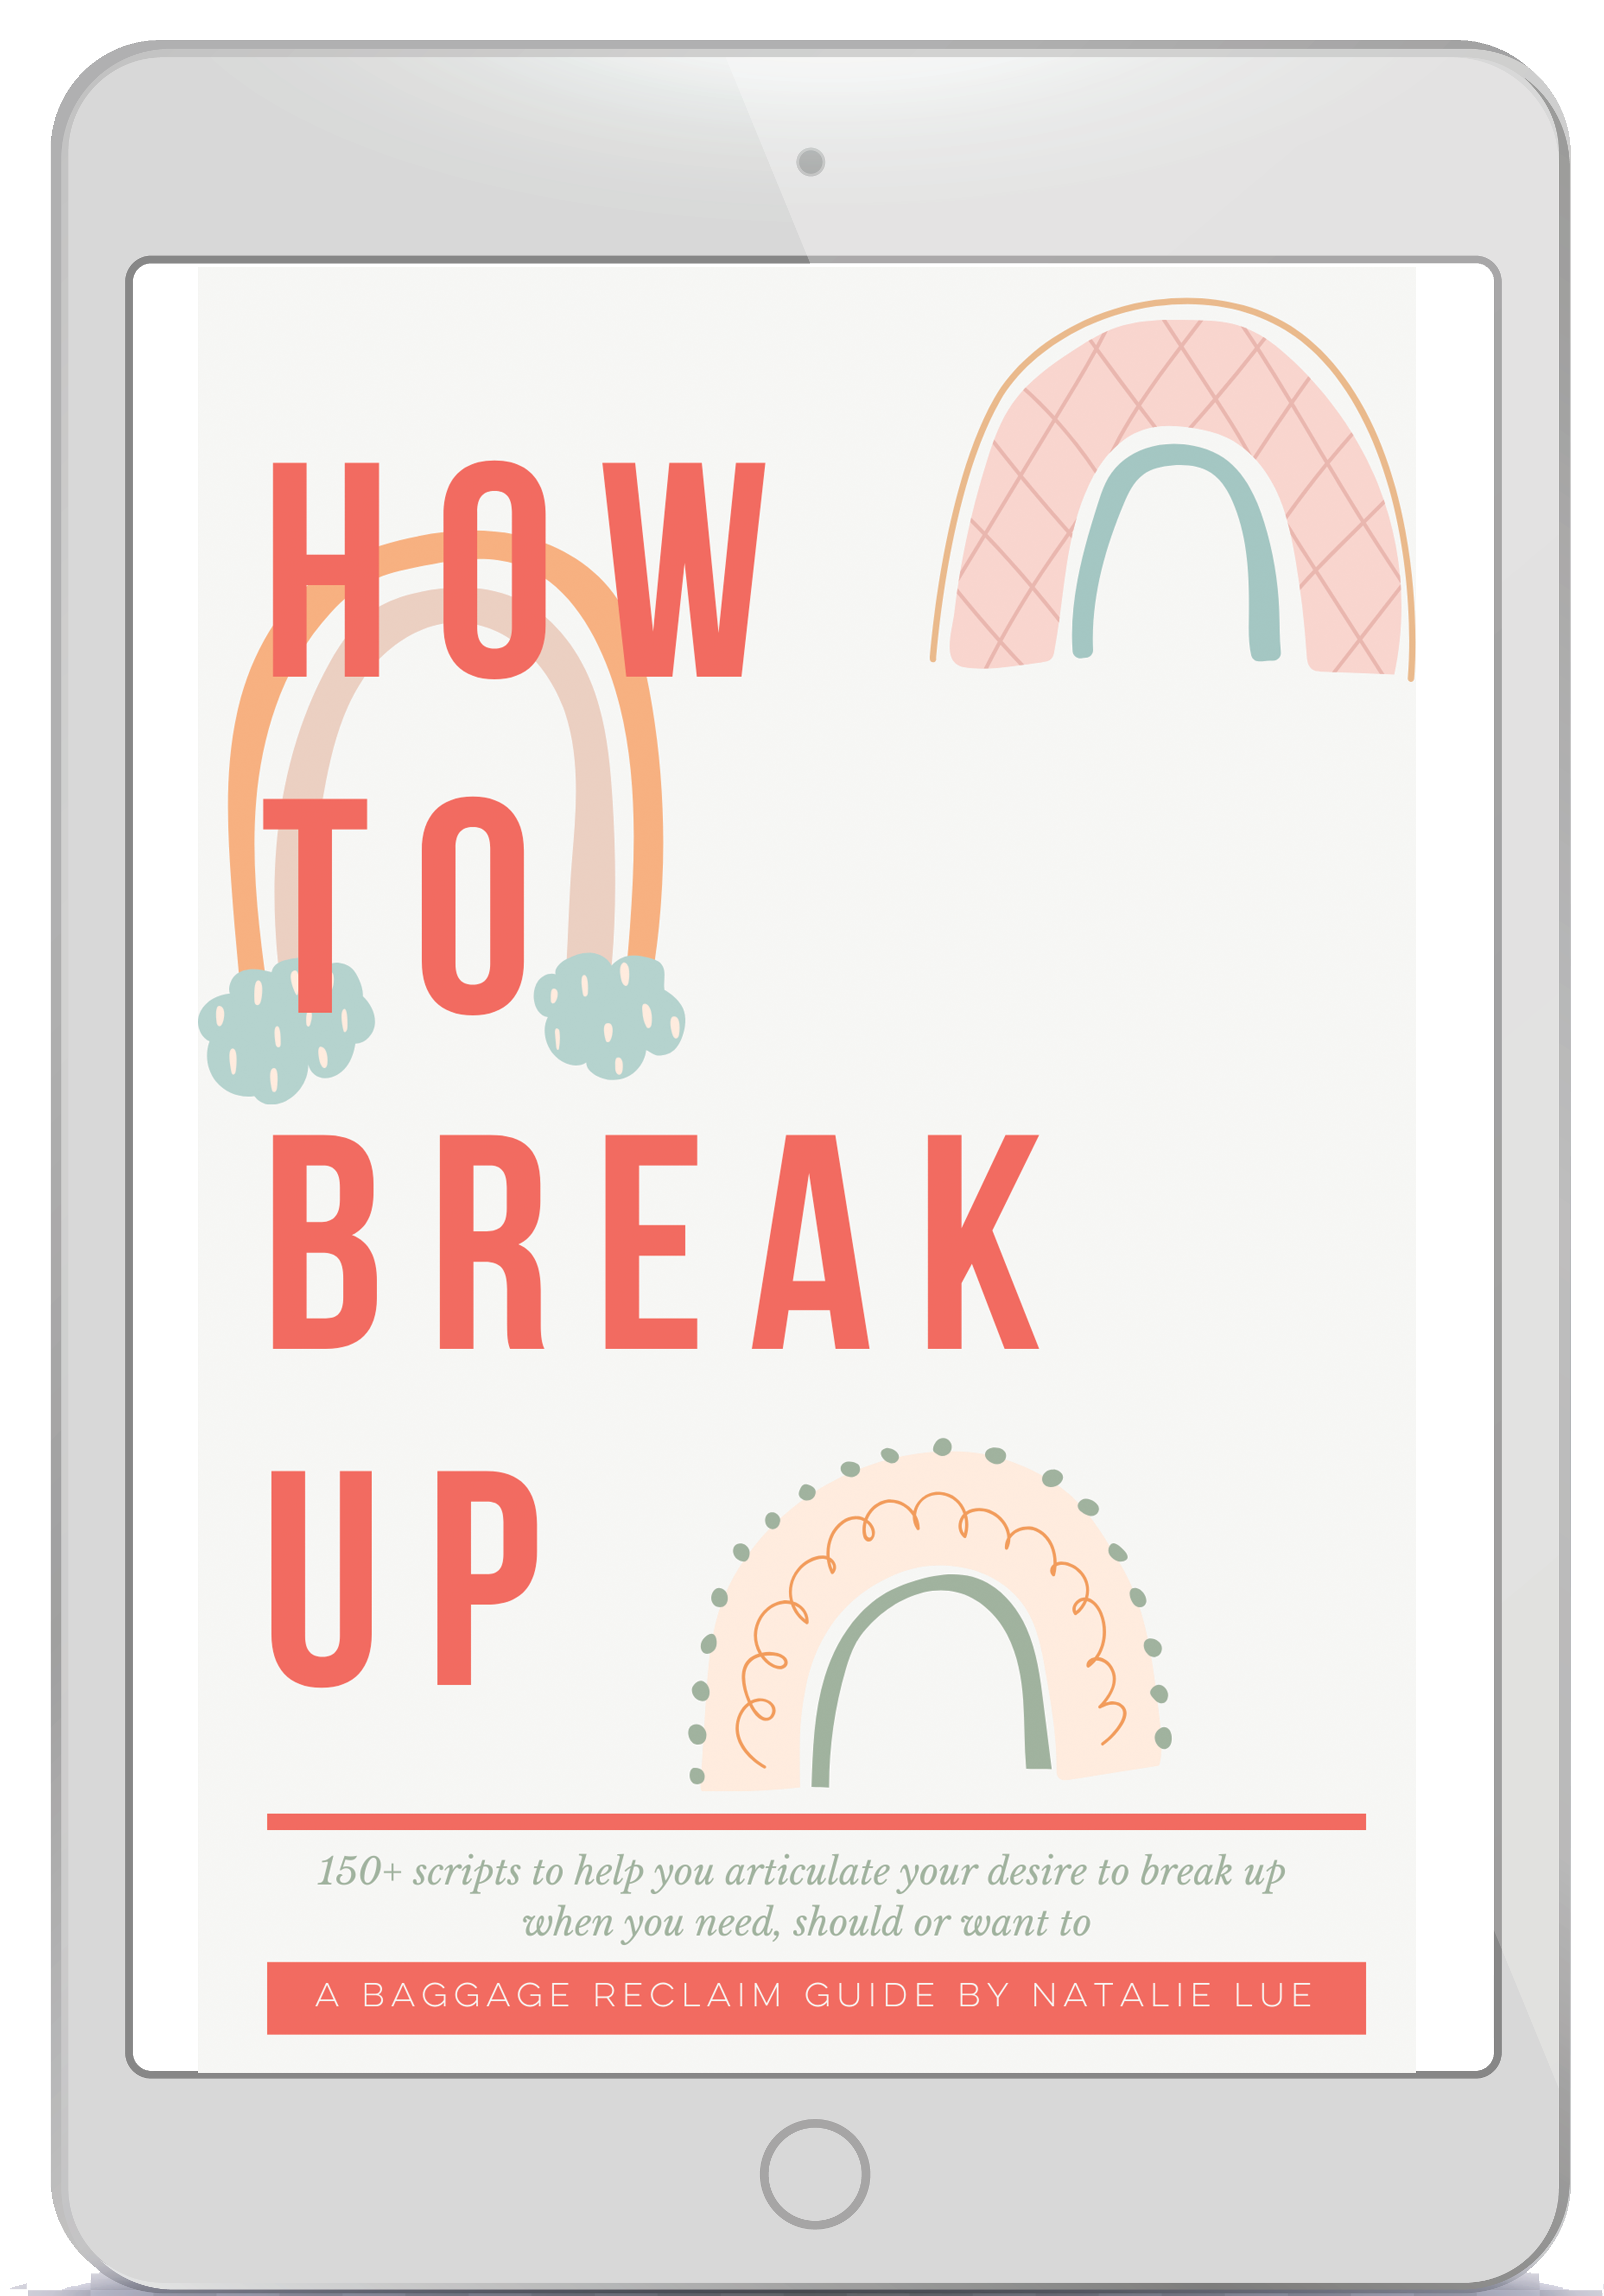 How To Break Up: The Scripts. 150+ scripts to help you break up when you need, should or want to. By Natalie Lue, Baggage Reclaim